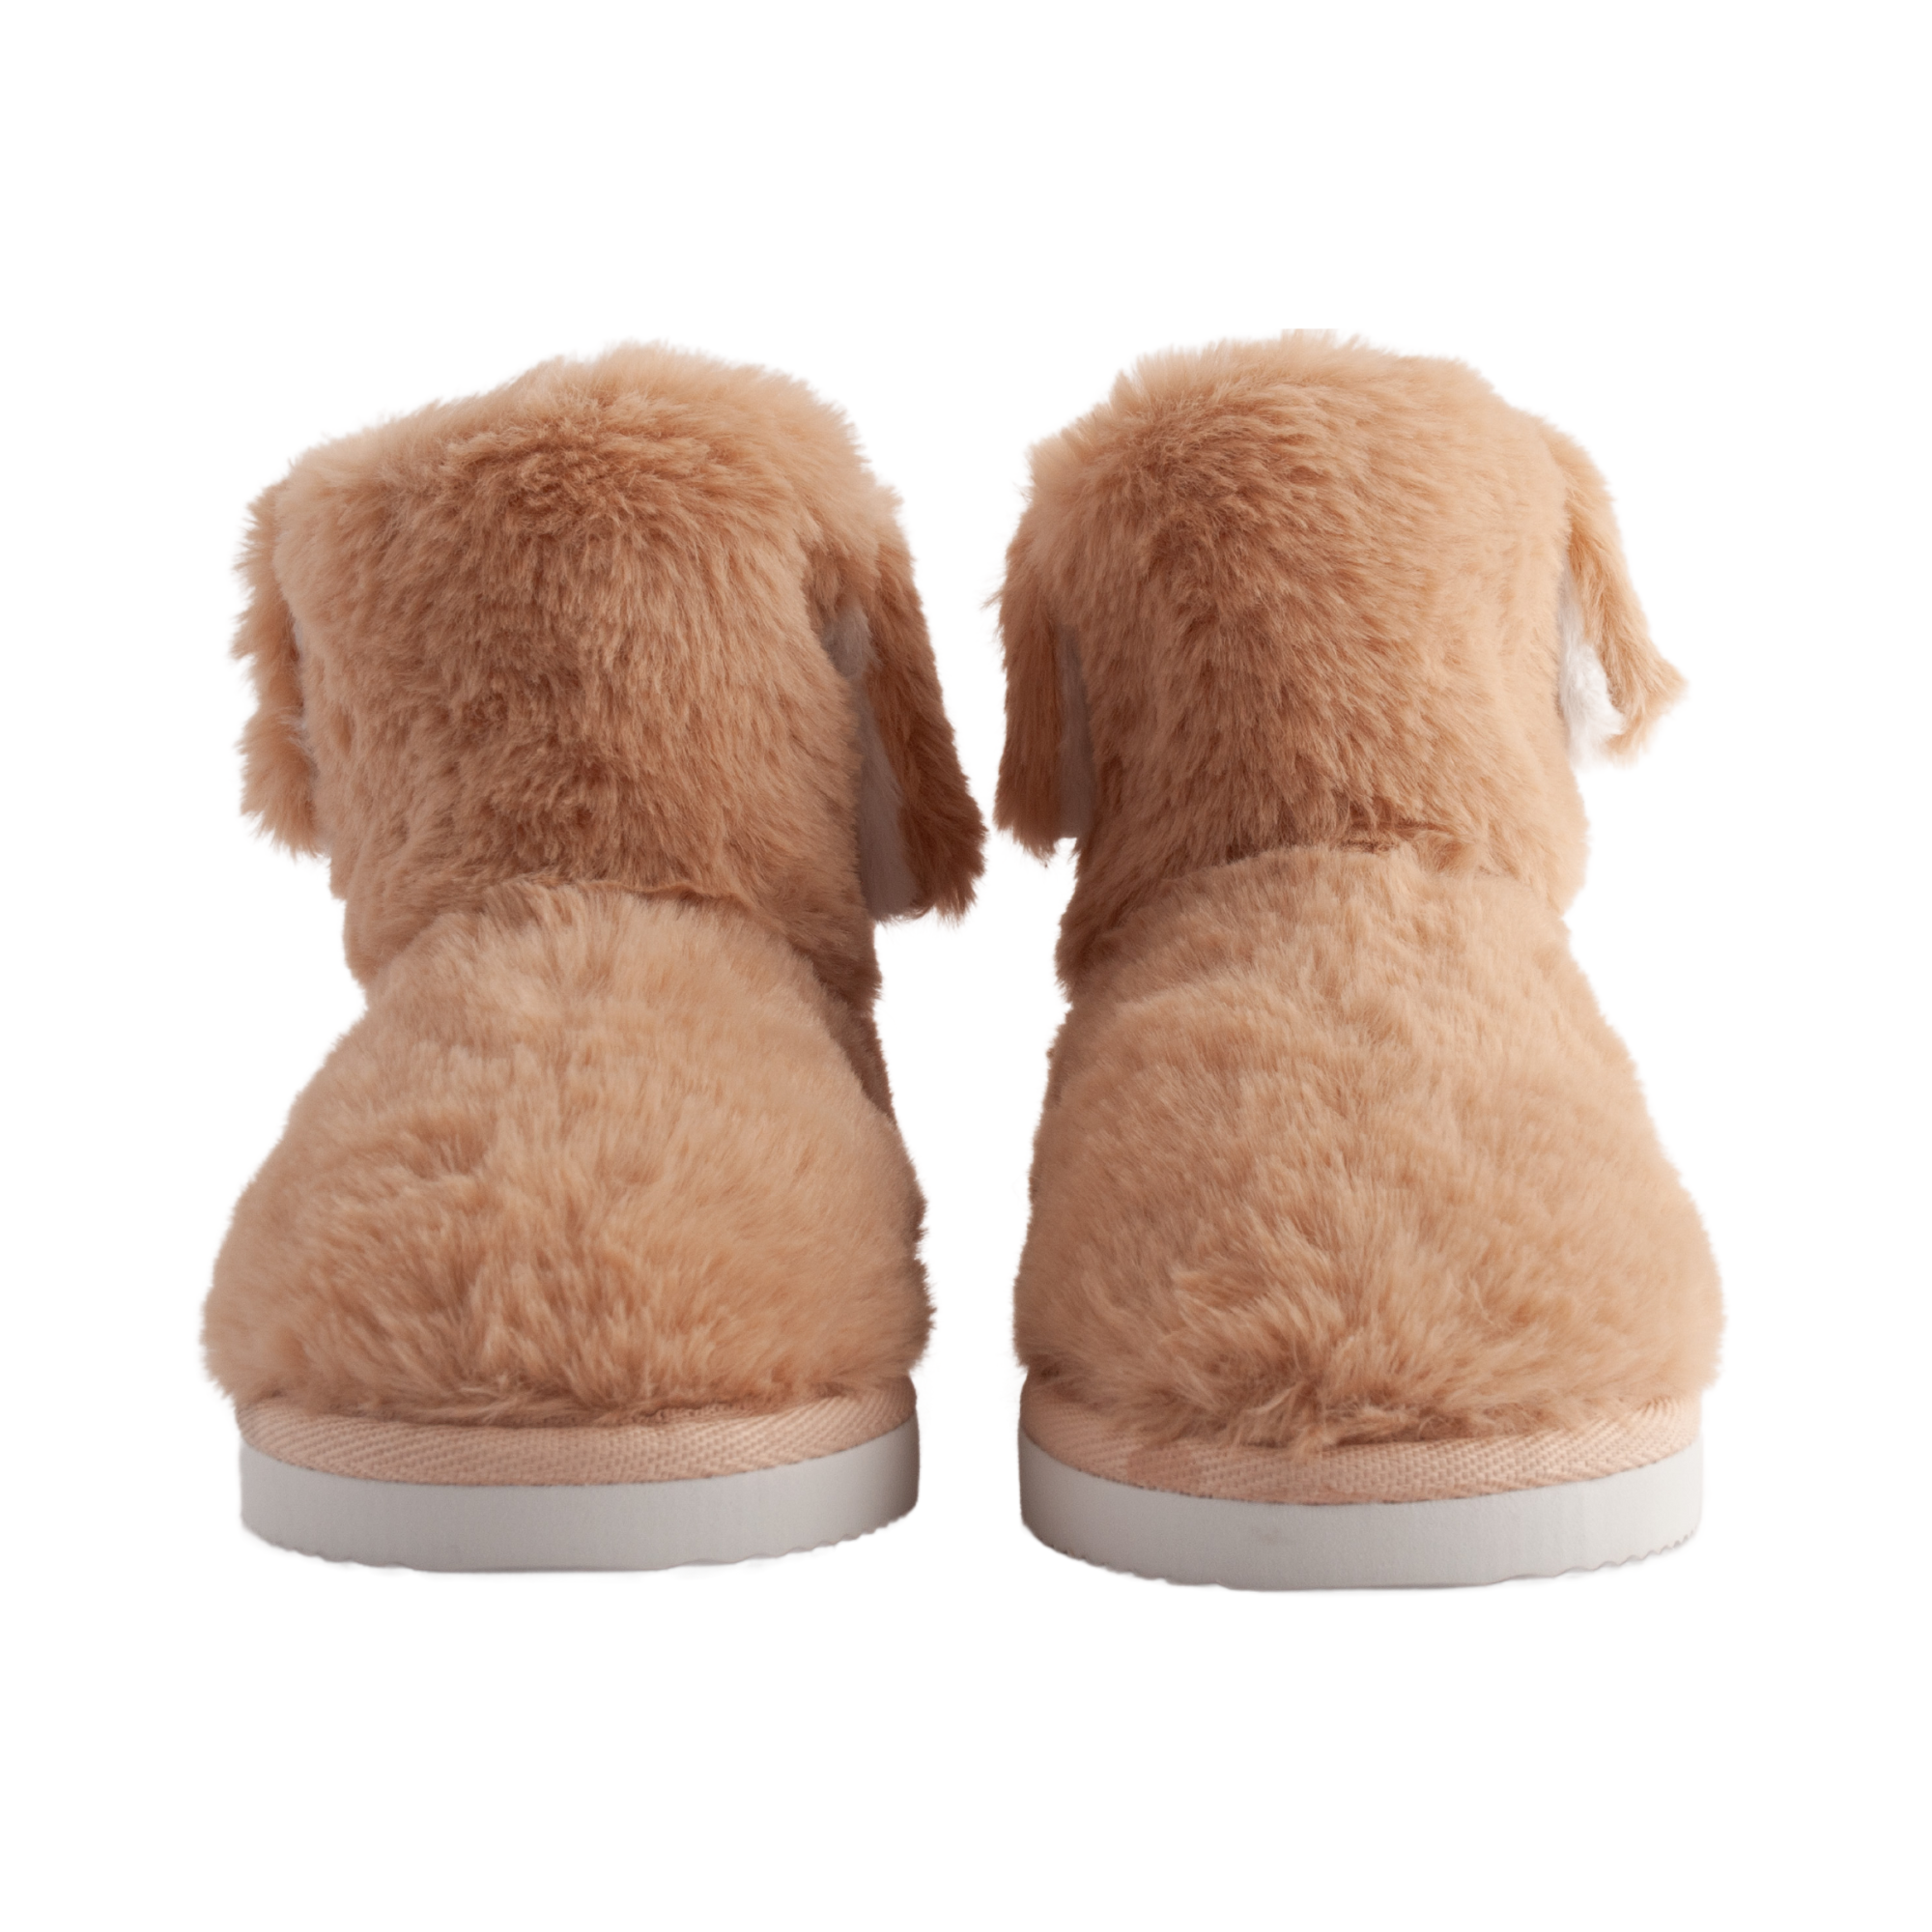 Novelty Slipper Boot - Brown Bunny Size 7-8